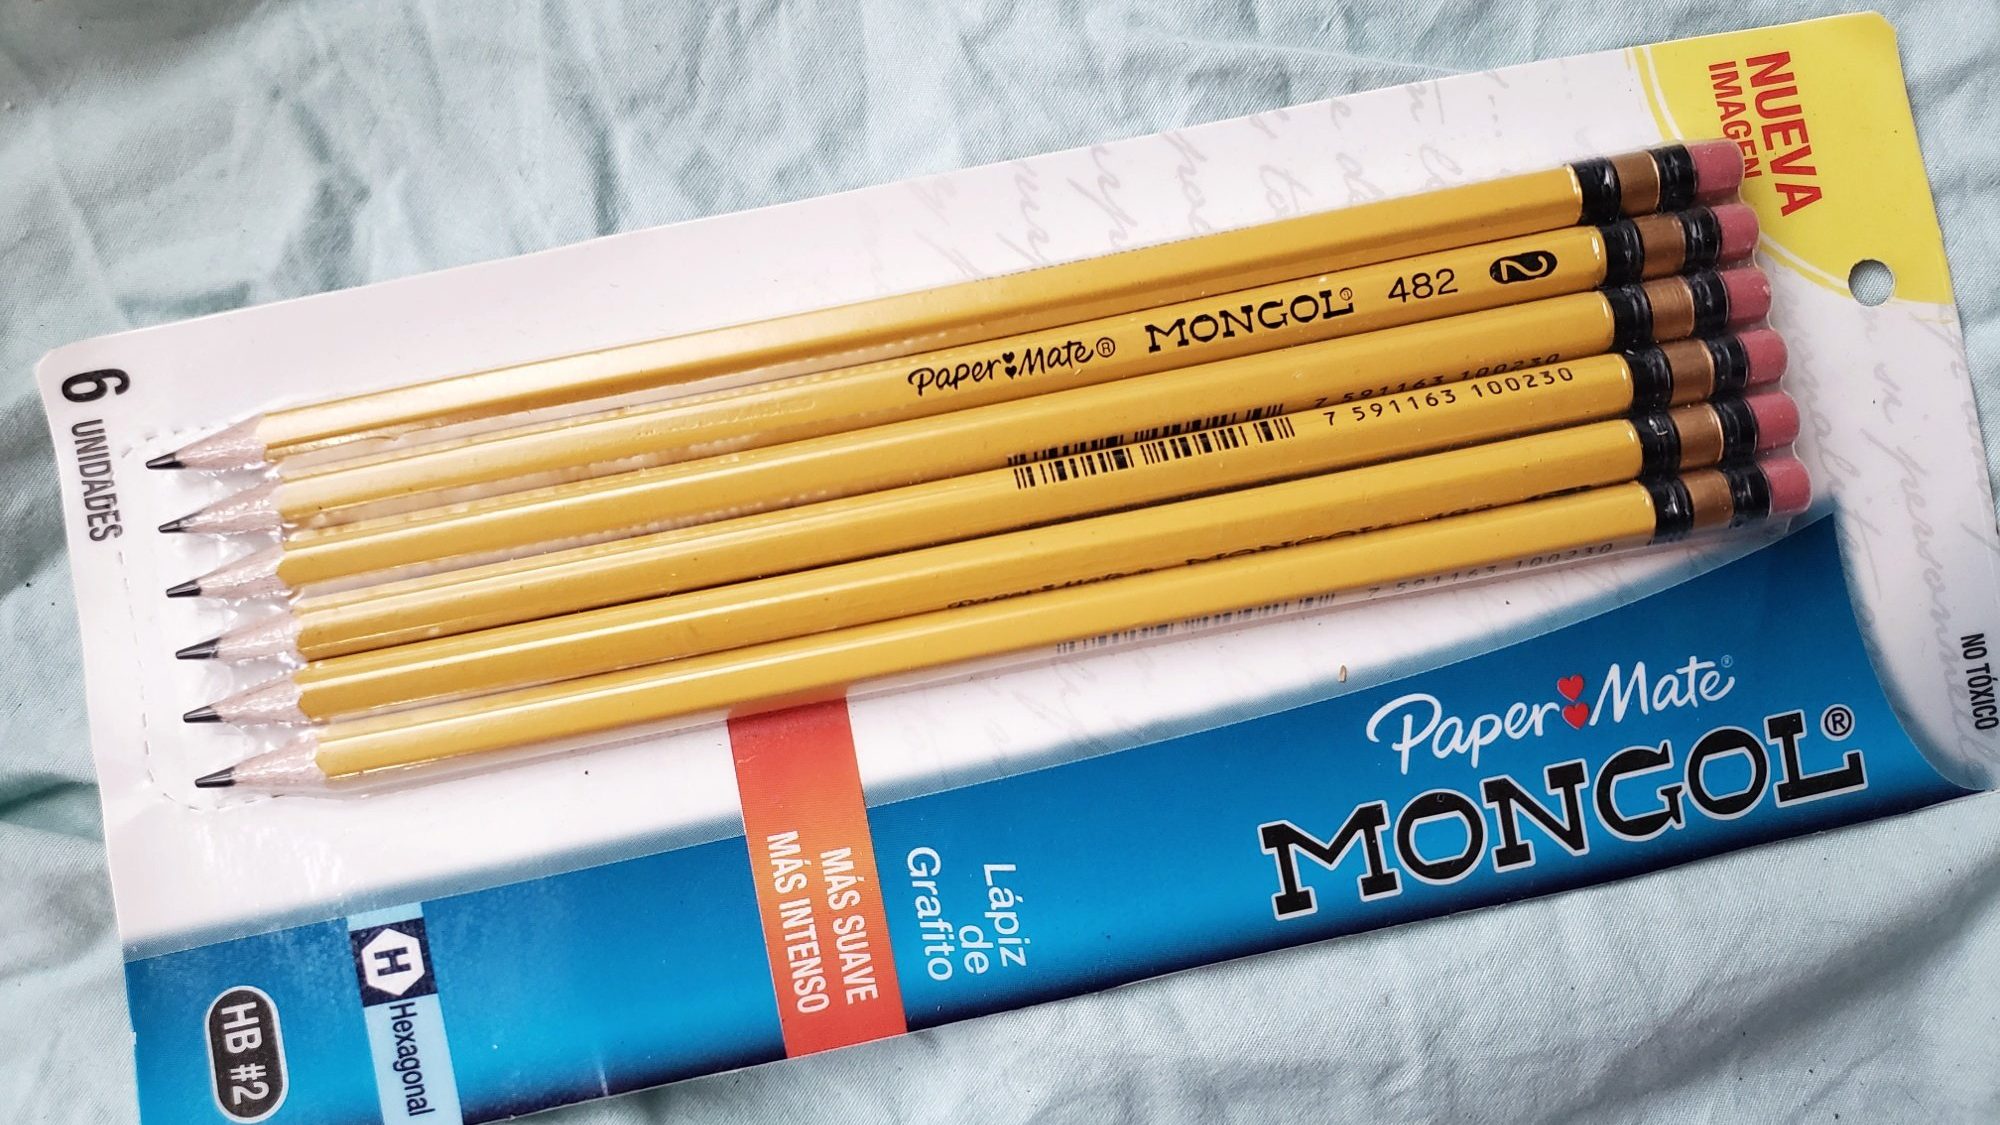 Pencil Review: Staedtler Tradition (HB) – Polar Pencil Pusher